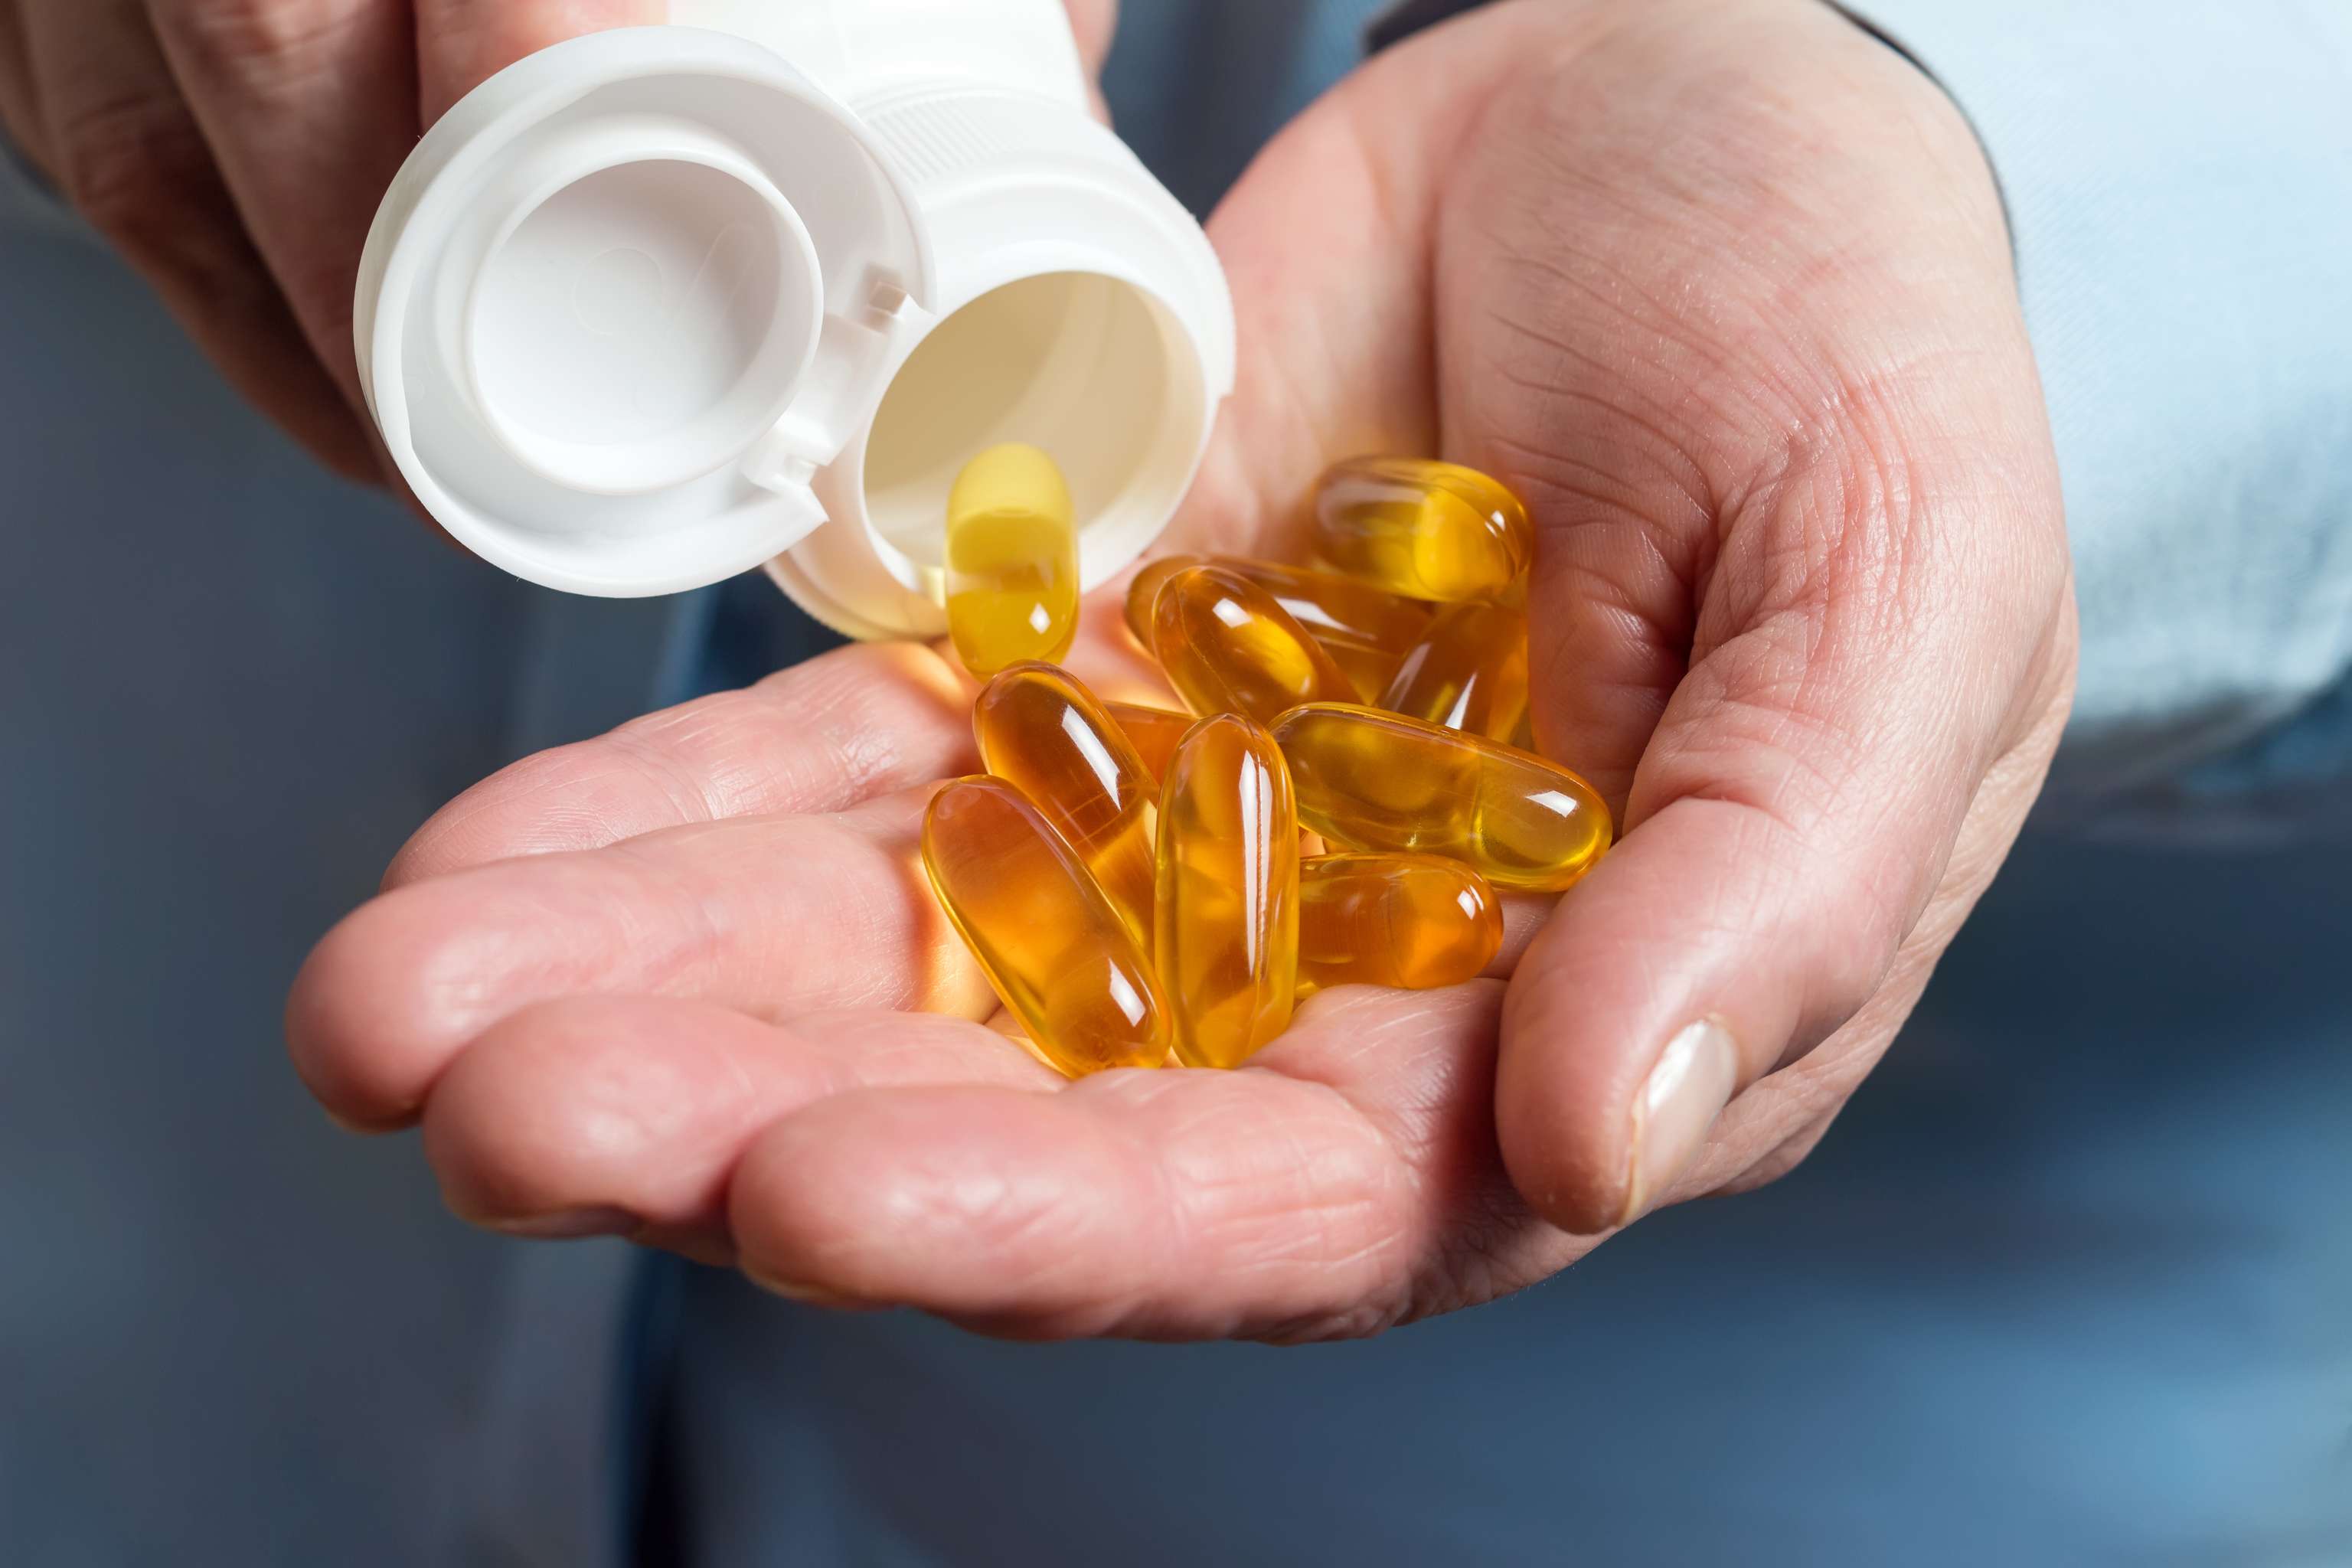 EMA issues marketing authorisation recommendation for modified omega-3 fatty acid